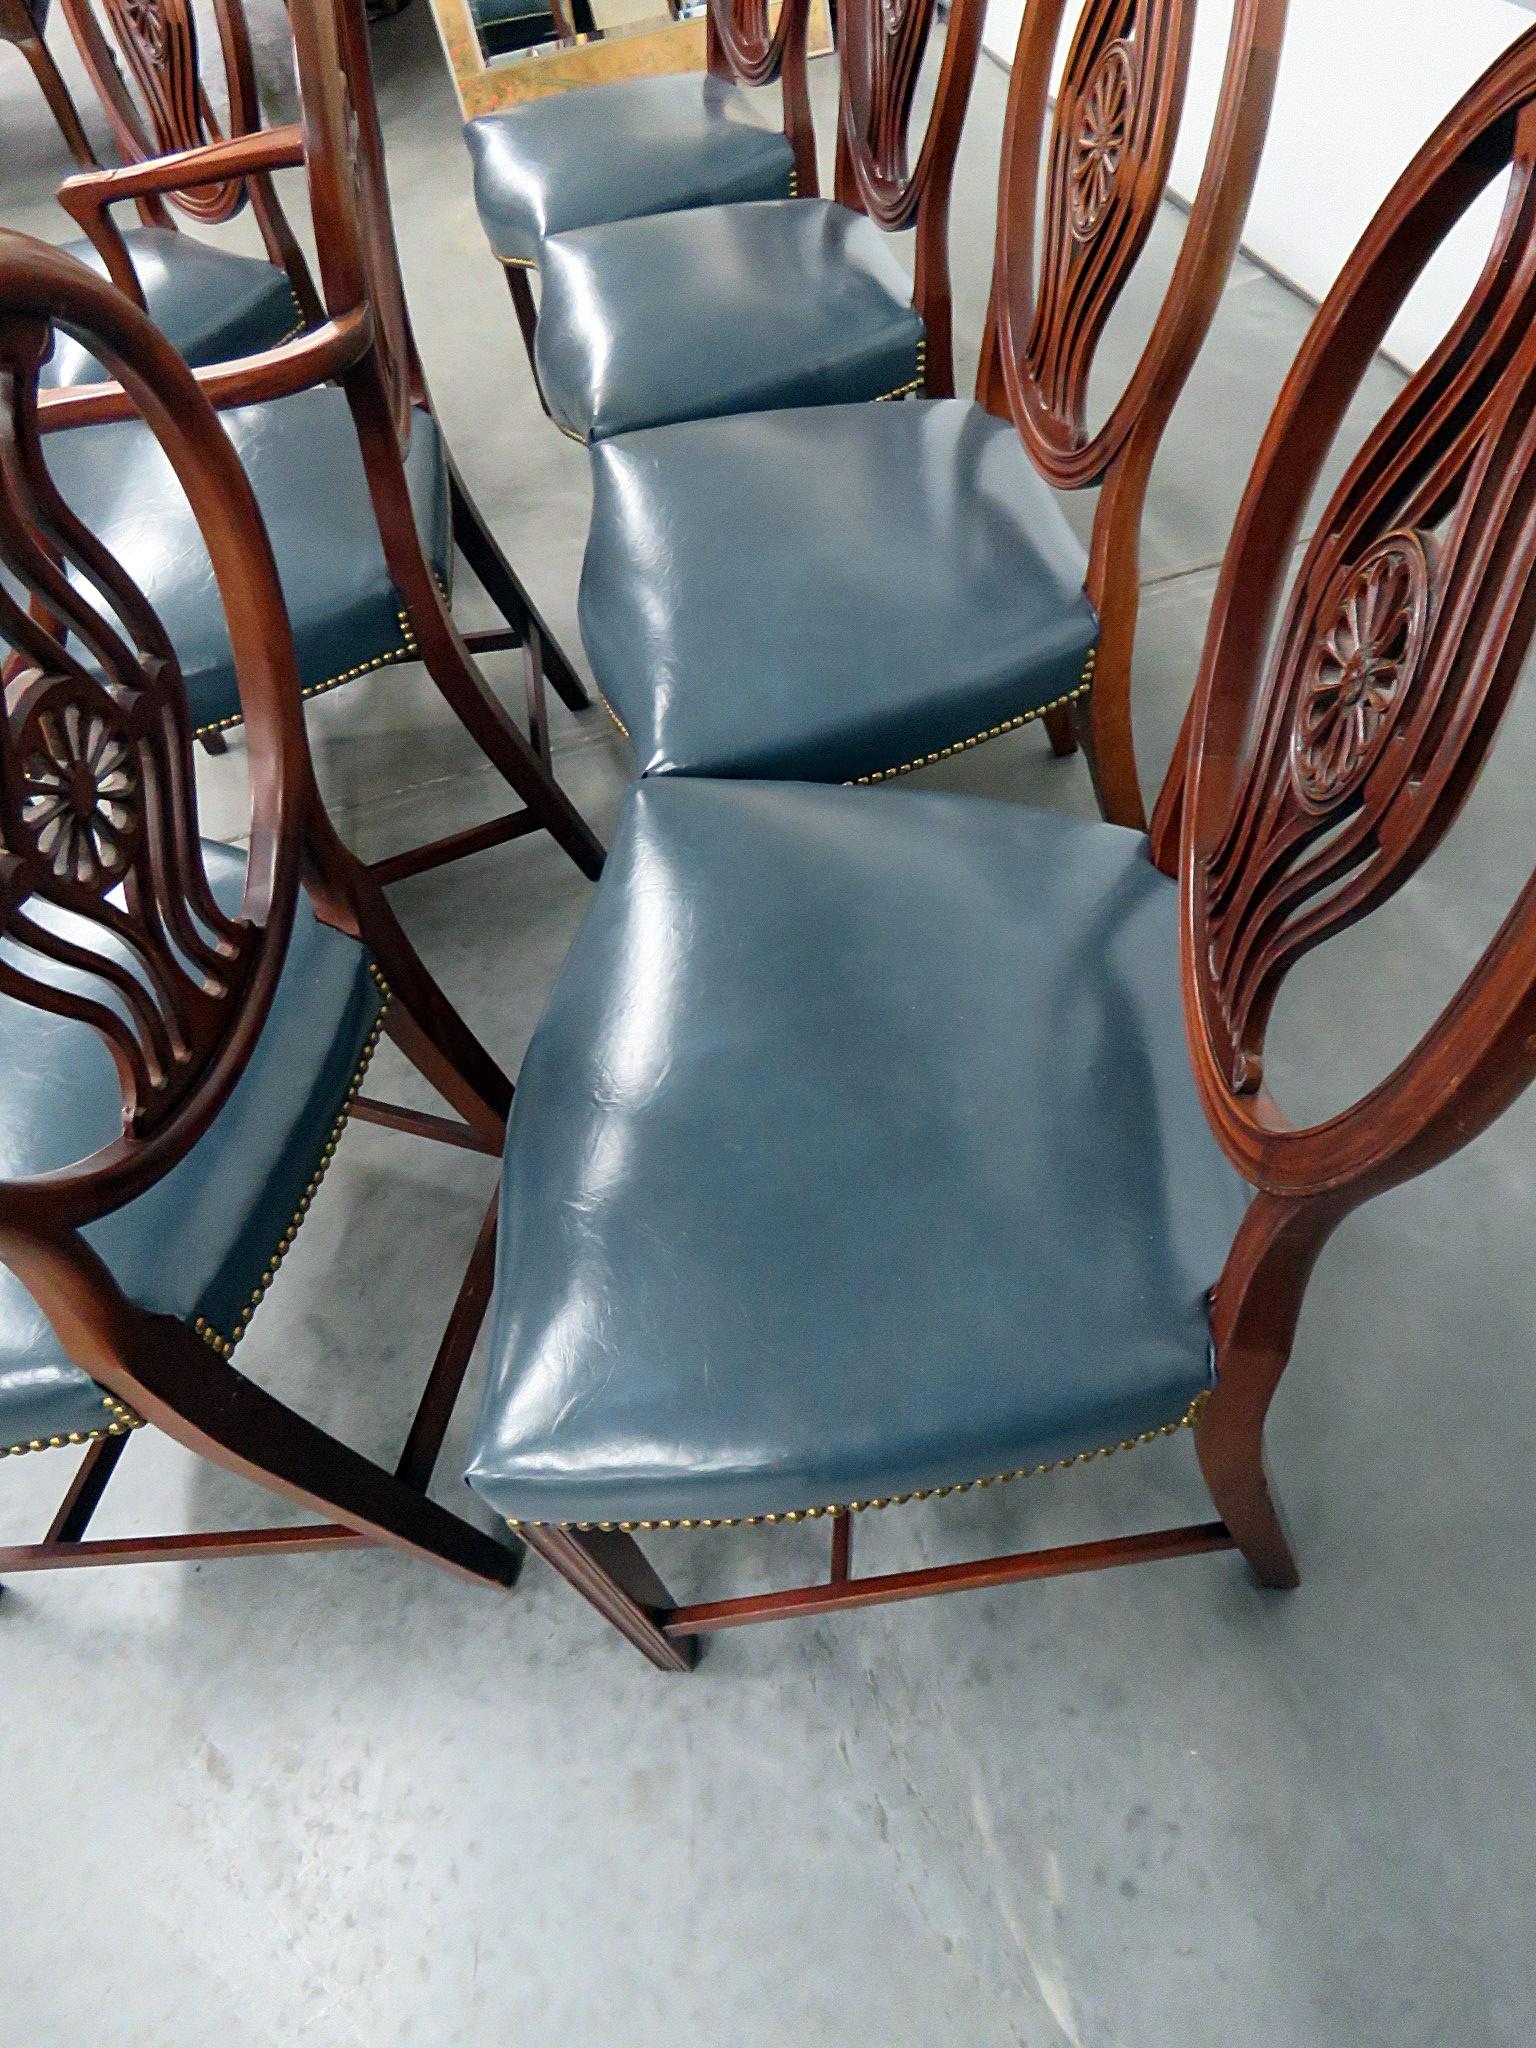 Set of 8 Georgian style dining room chairs with leather upholstery and nailhead trim. The 2 armchairs measure 28.5